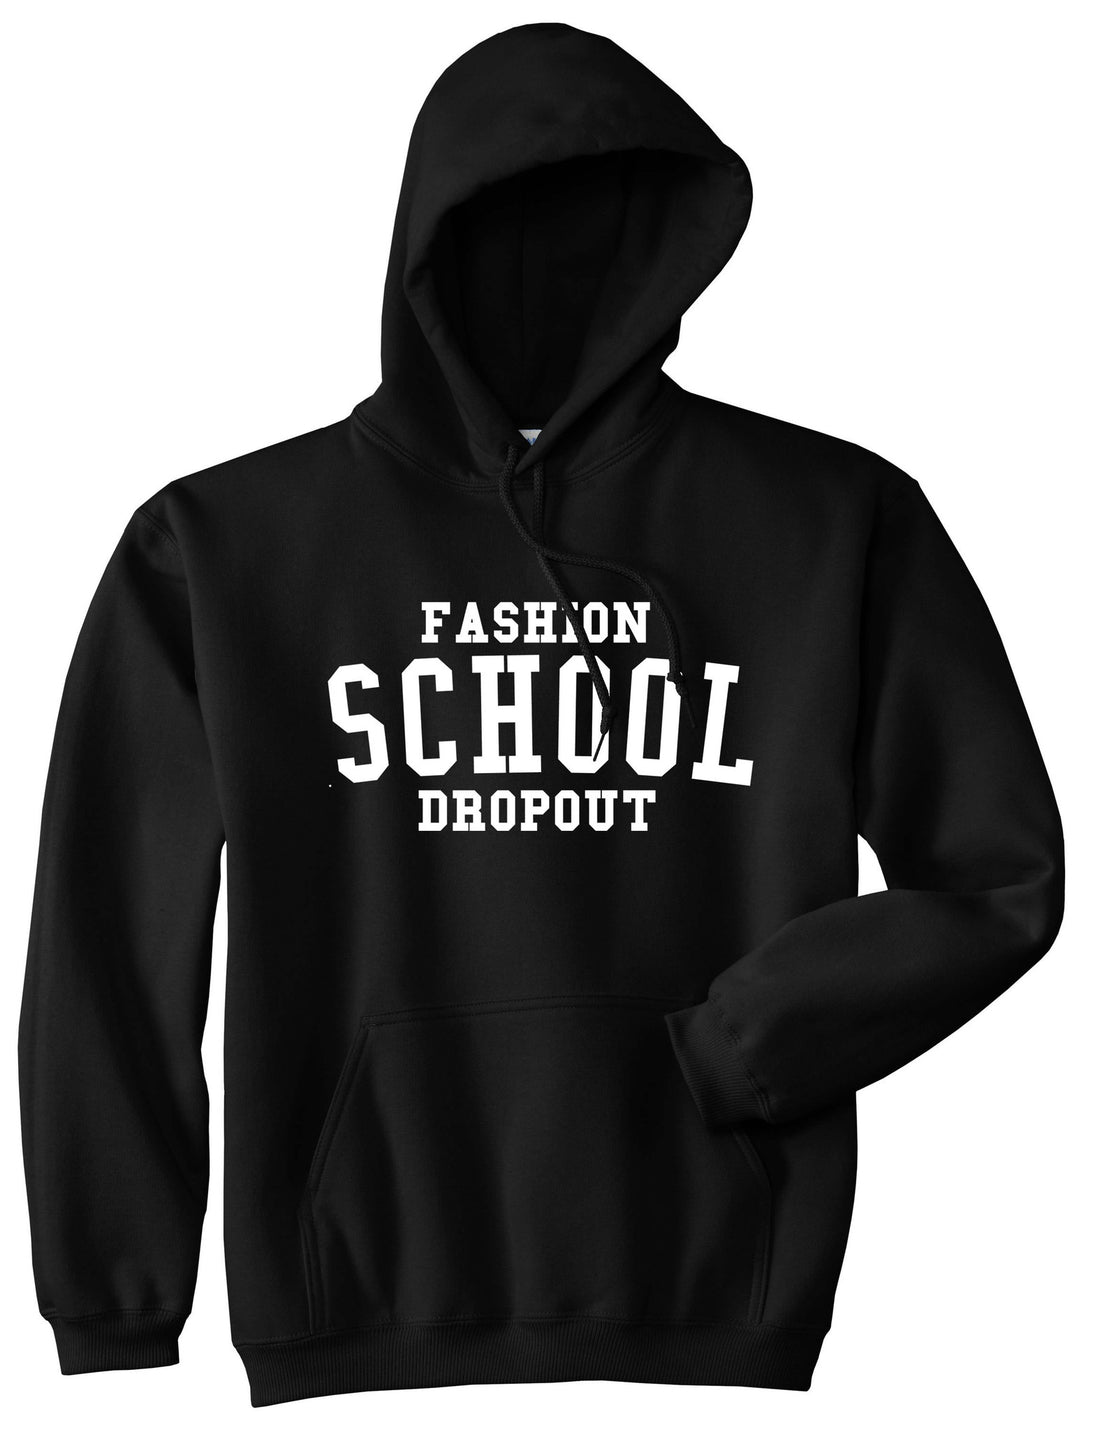 Fashion School Dropout Blogger Boys Kids Pullover Hoodie Hoody in Black By Kings Of NY